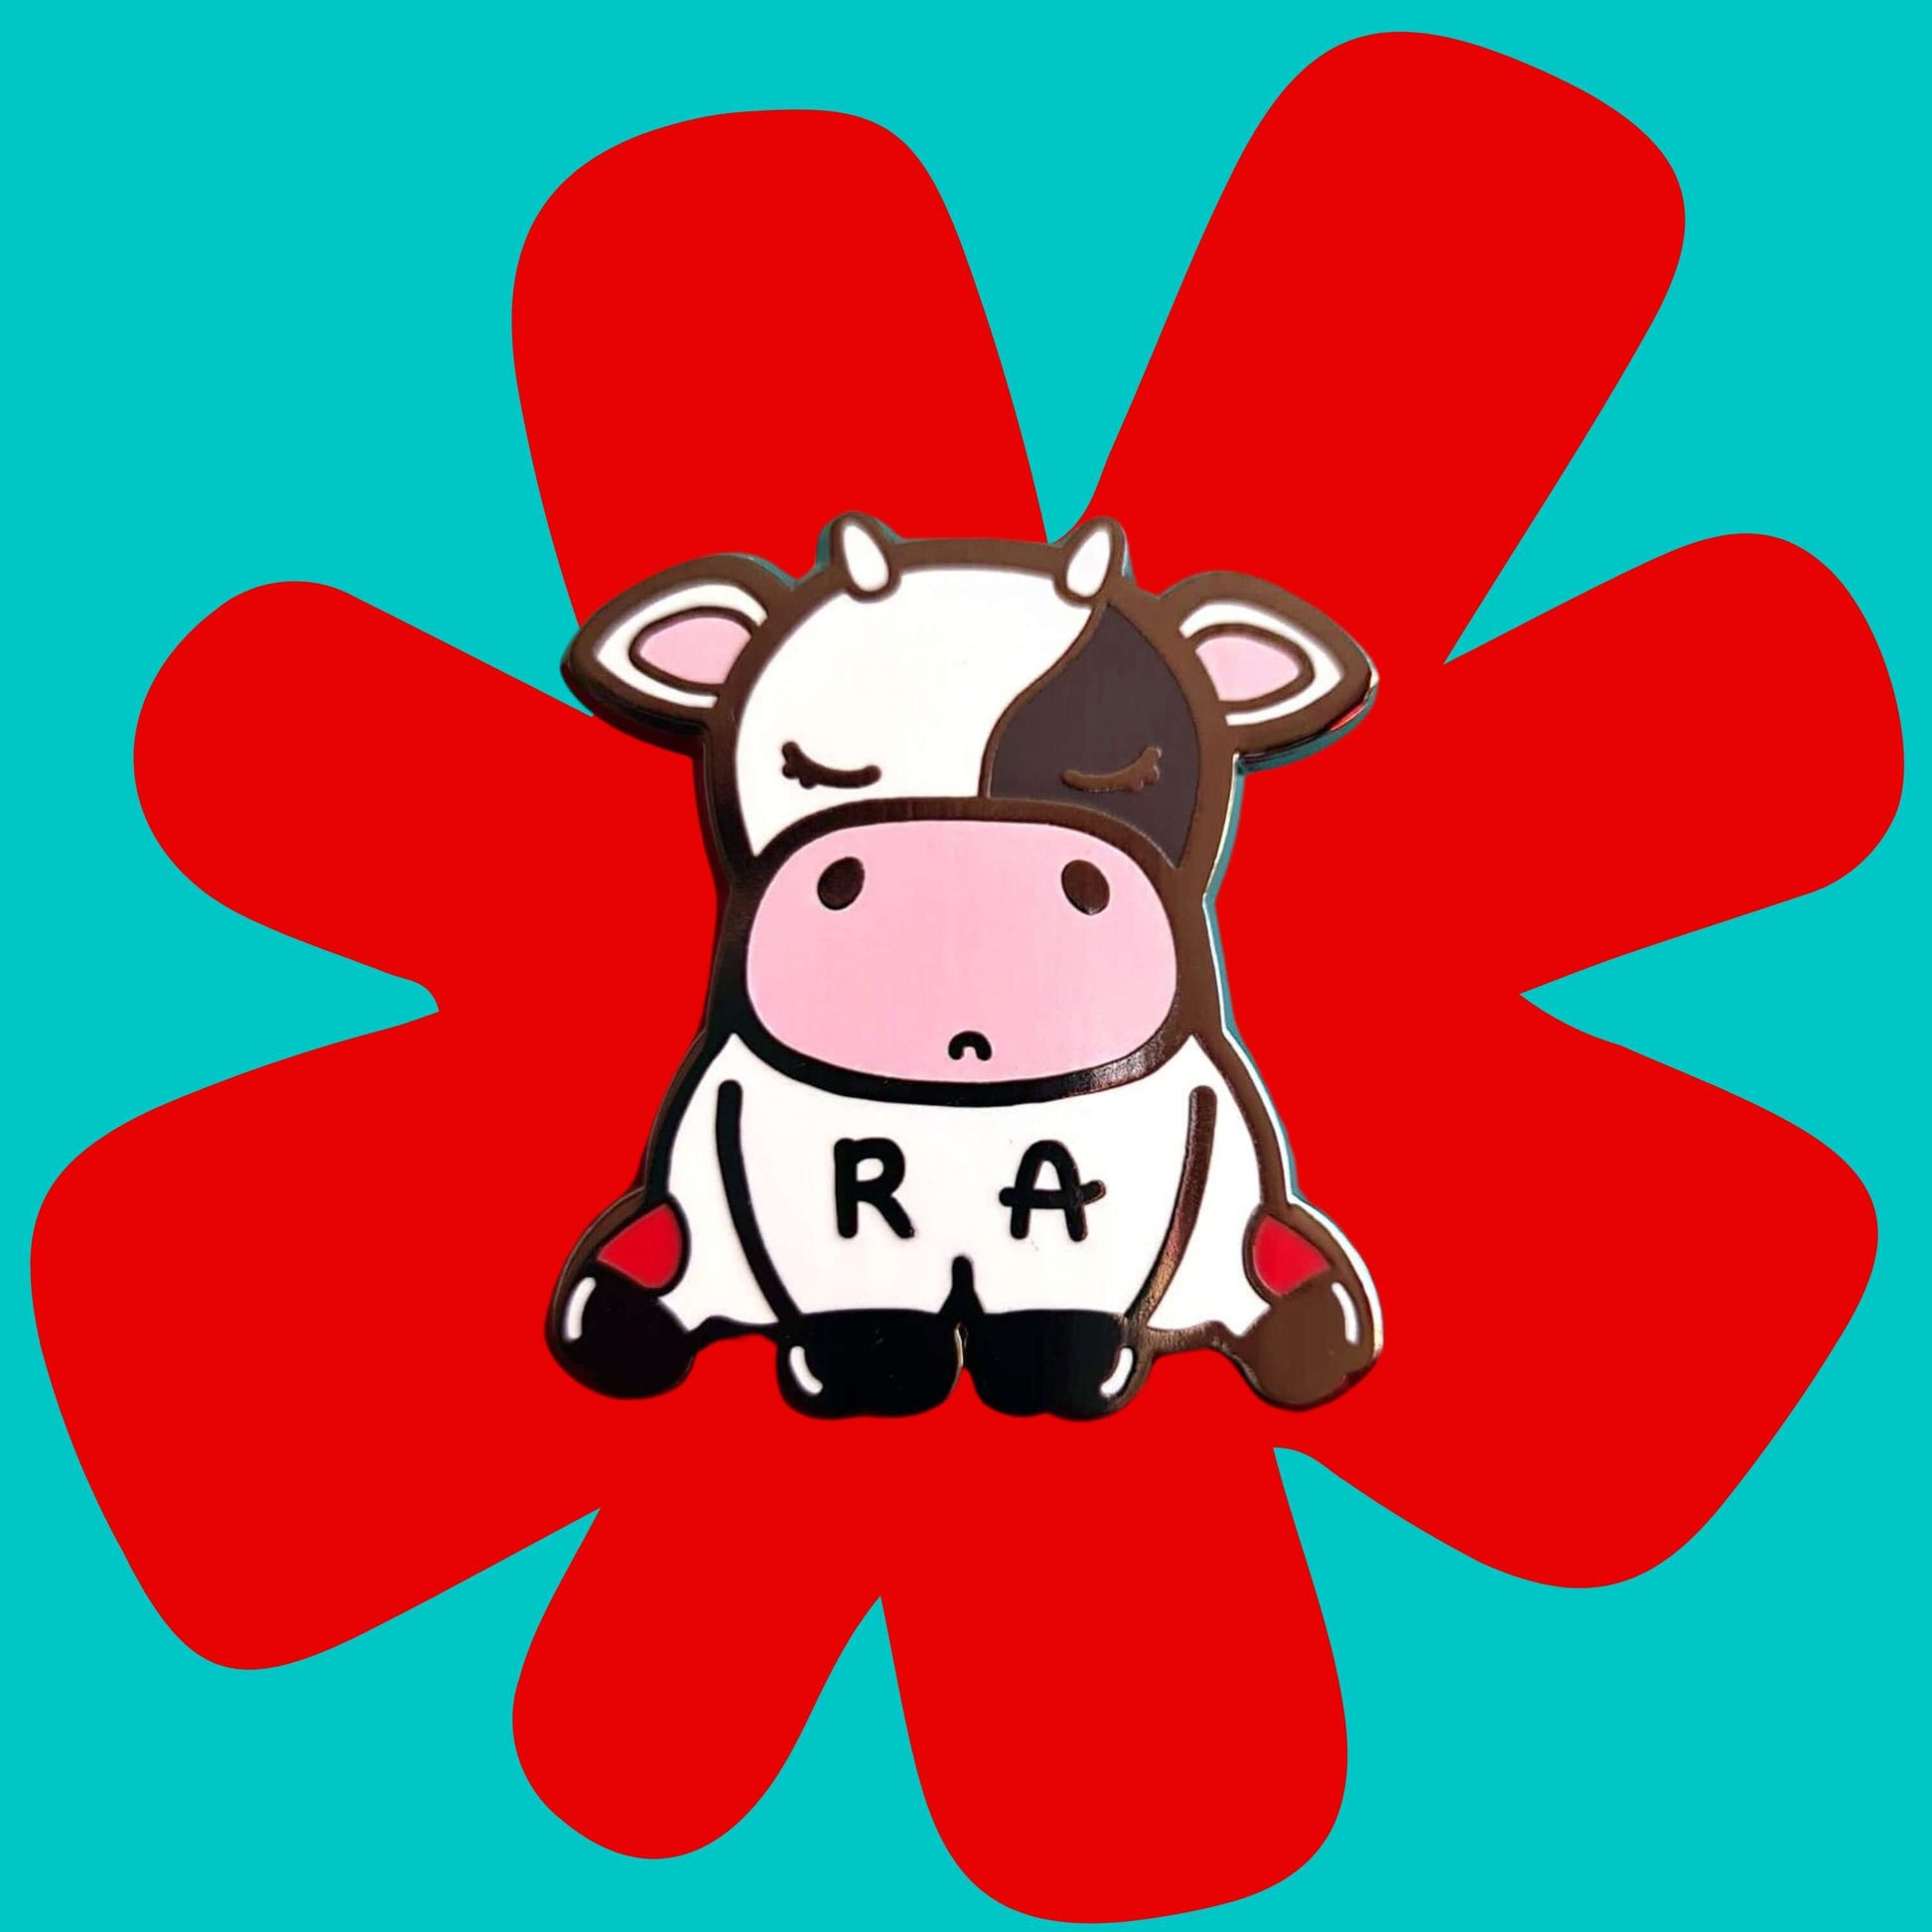 The Moomatoid Arthritis Cow Enamel Pin - Rheumatoid Arthritis on a red and blue background. The sad cow shape pin has red marks on its lower back legs and the initials R and A across its middle. The hand drawn design is raising awareness for Rheumatoid Arthritis.